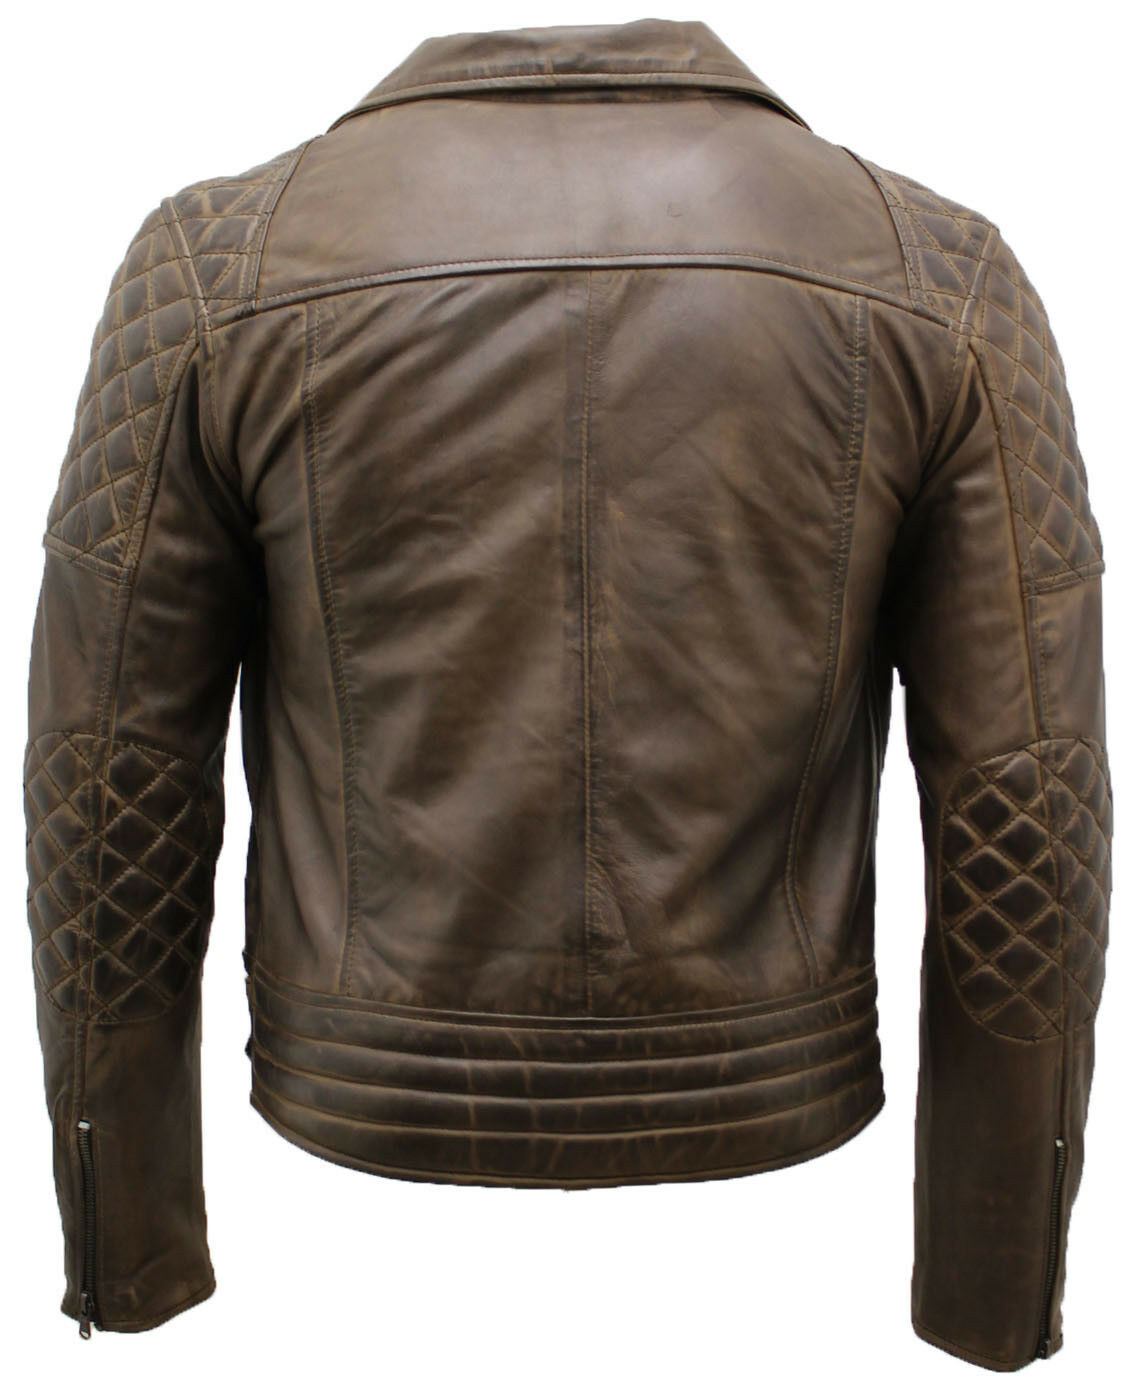 Mens Quilted Leather Biker Jacket-Stonehouse - Upperclass Fashions 